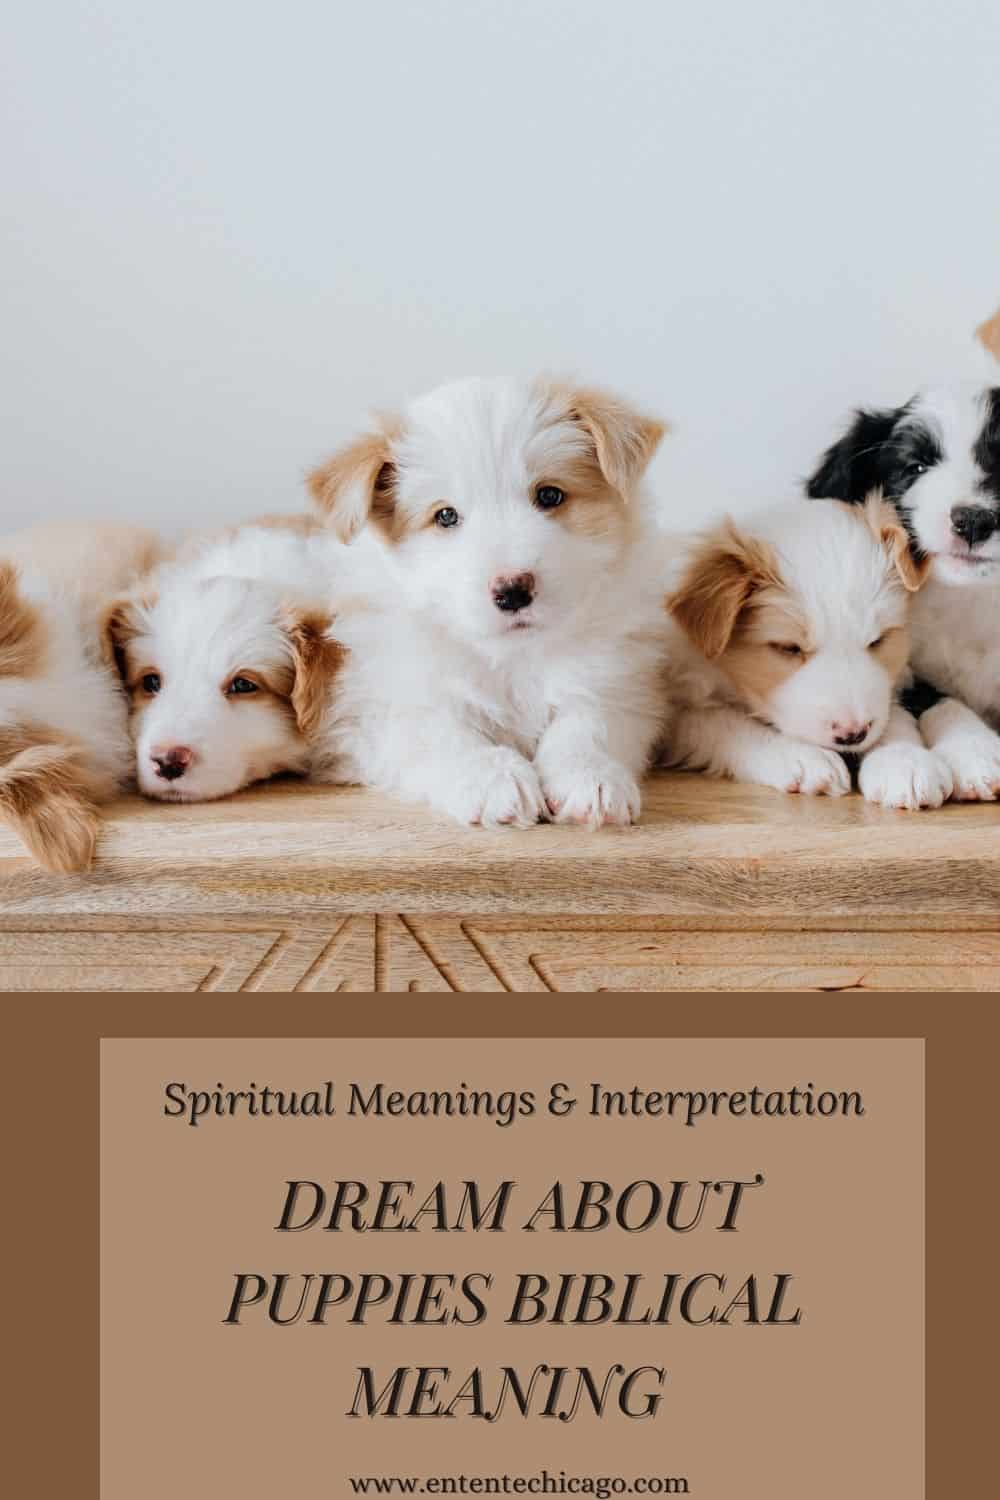 8 Biblical Meaning of Puppies in Dreams